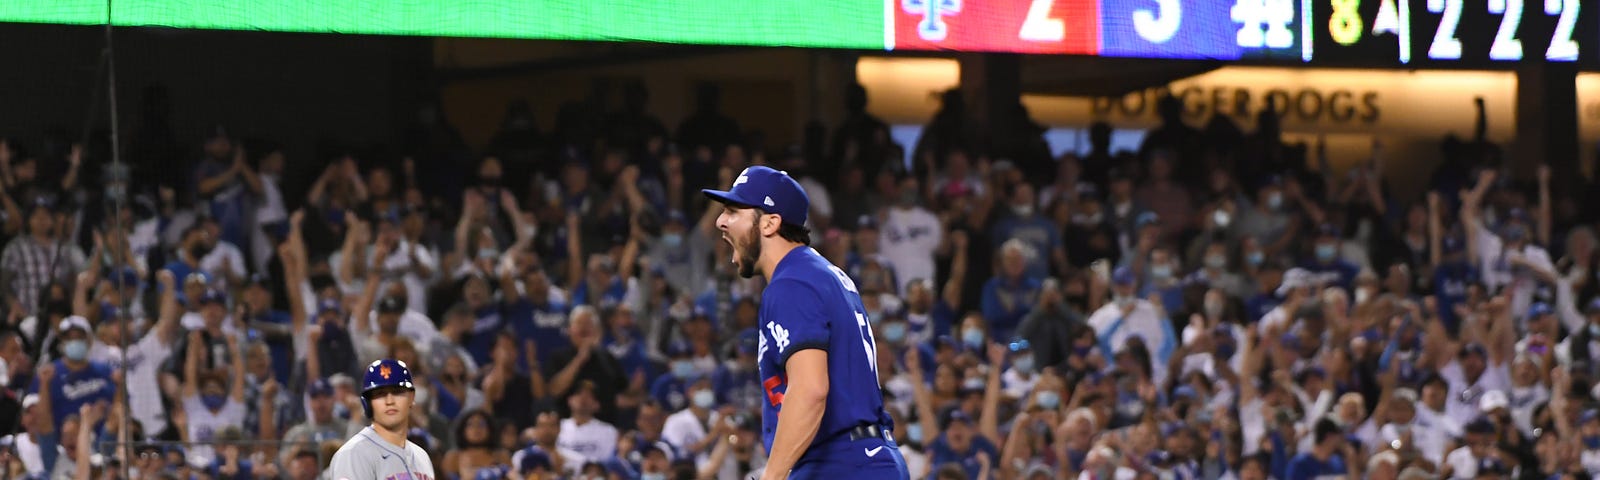 Fire, swag and calm — diverse personalities make Dodger bullpen a success, by Cary Osborne